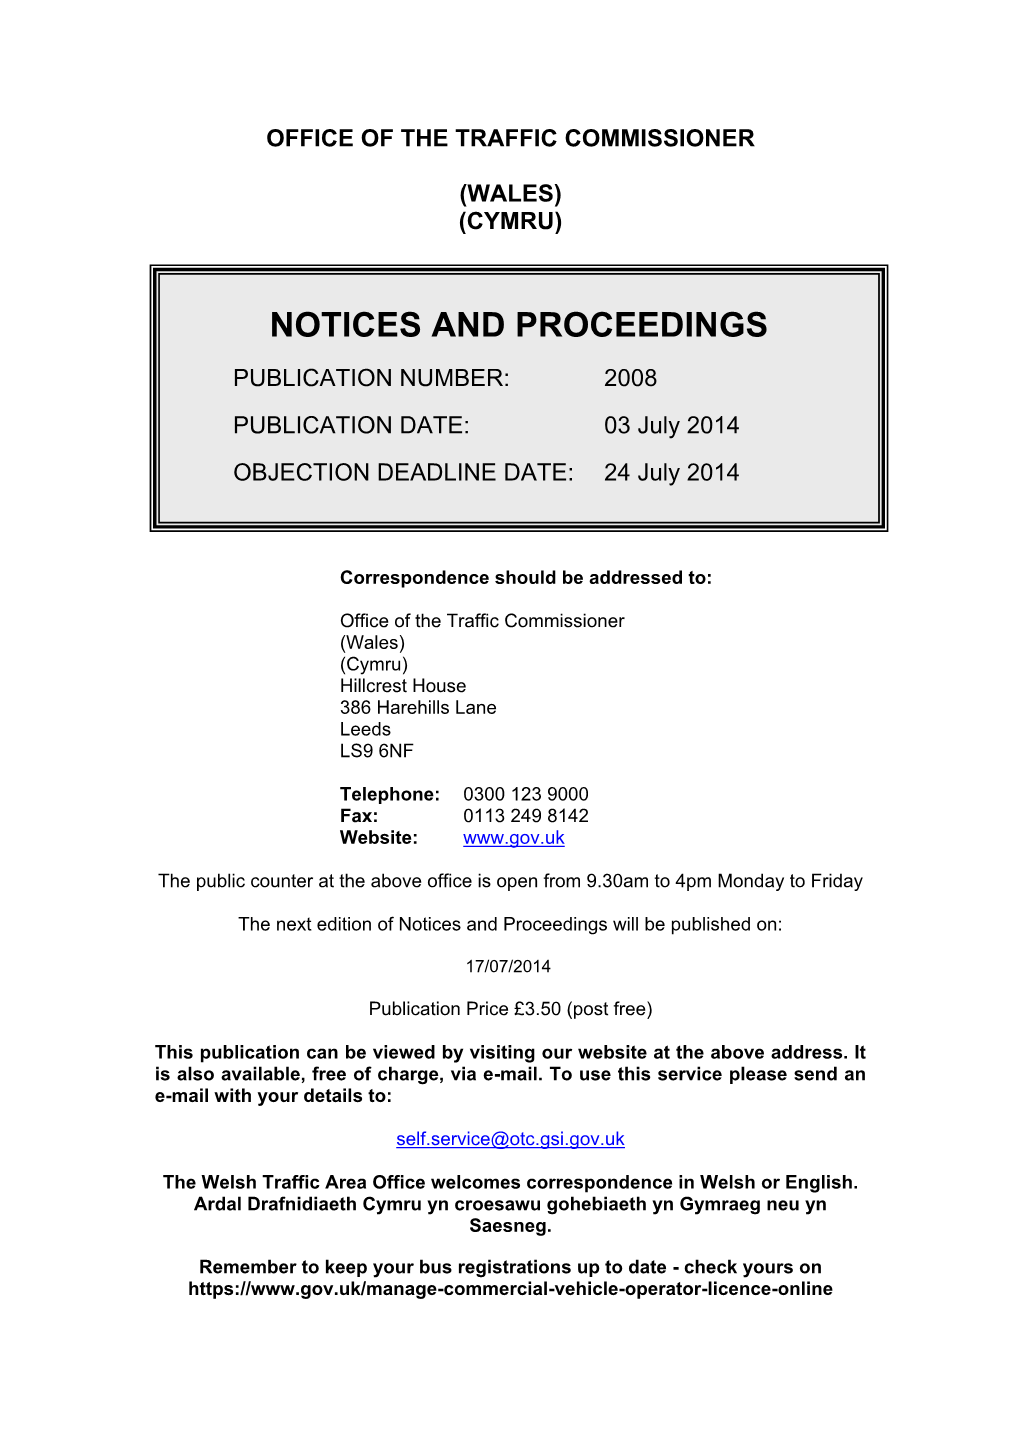 Notices and Proceedings 3July 2014